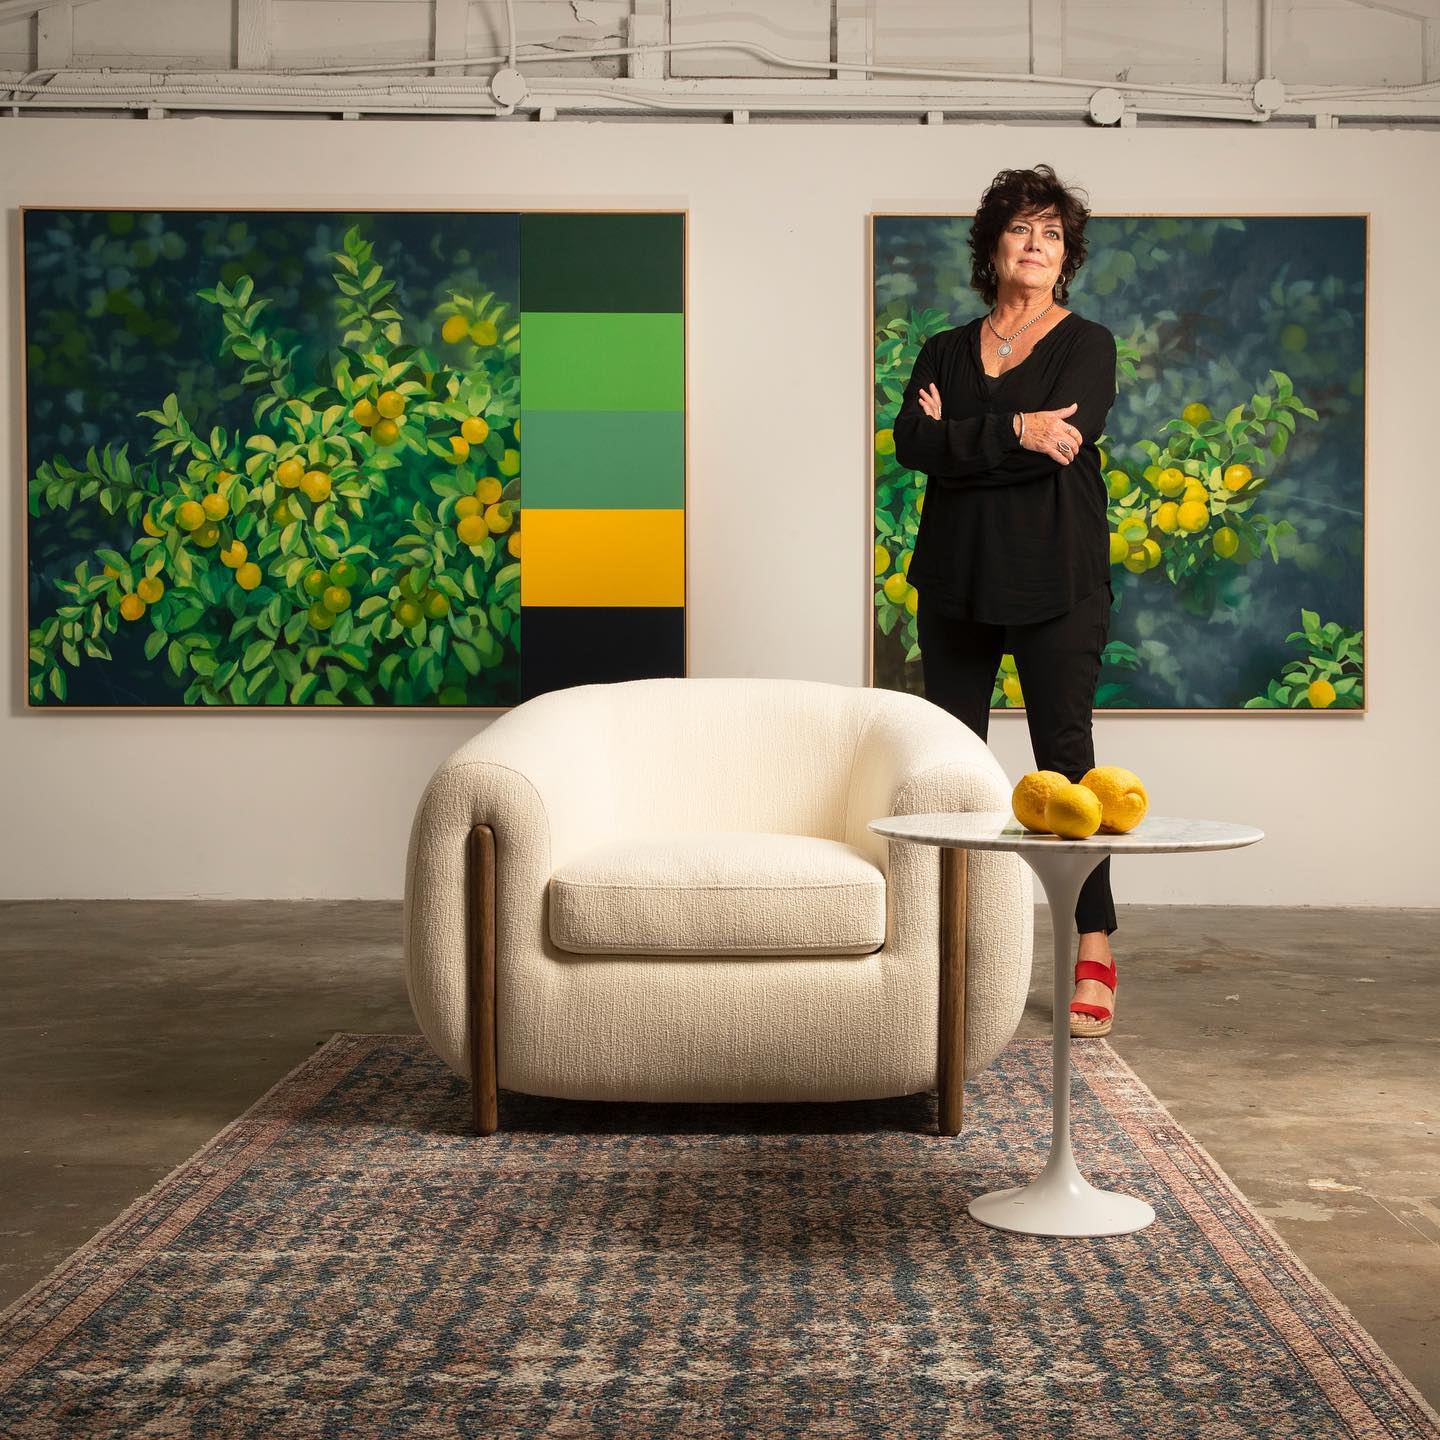 “As SCAPE gallery heads into its 20th anniversary in 2023, what I continue to hold most dear are my relationships with an invigorating array of artists, supportive clients, and Southern California’s thriving art community,” says Blue Door Member and SCAPE gallery owner Jeannie Denholm. Read more in the current issue of Blur Door Magazine. Art by Jeff Peters @bluedoormagazine @scapegallery #bluedoormagazine #scapegallery #southerncaliforniaartprojectsandexhibitions #lagunabeachlife #coastalorangecountyliving #socalartsandculture